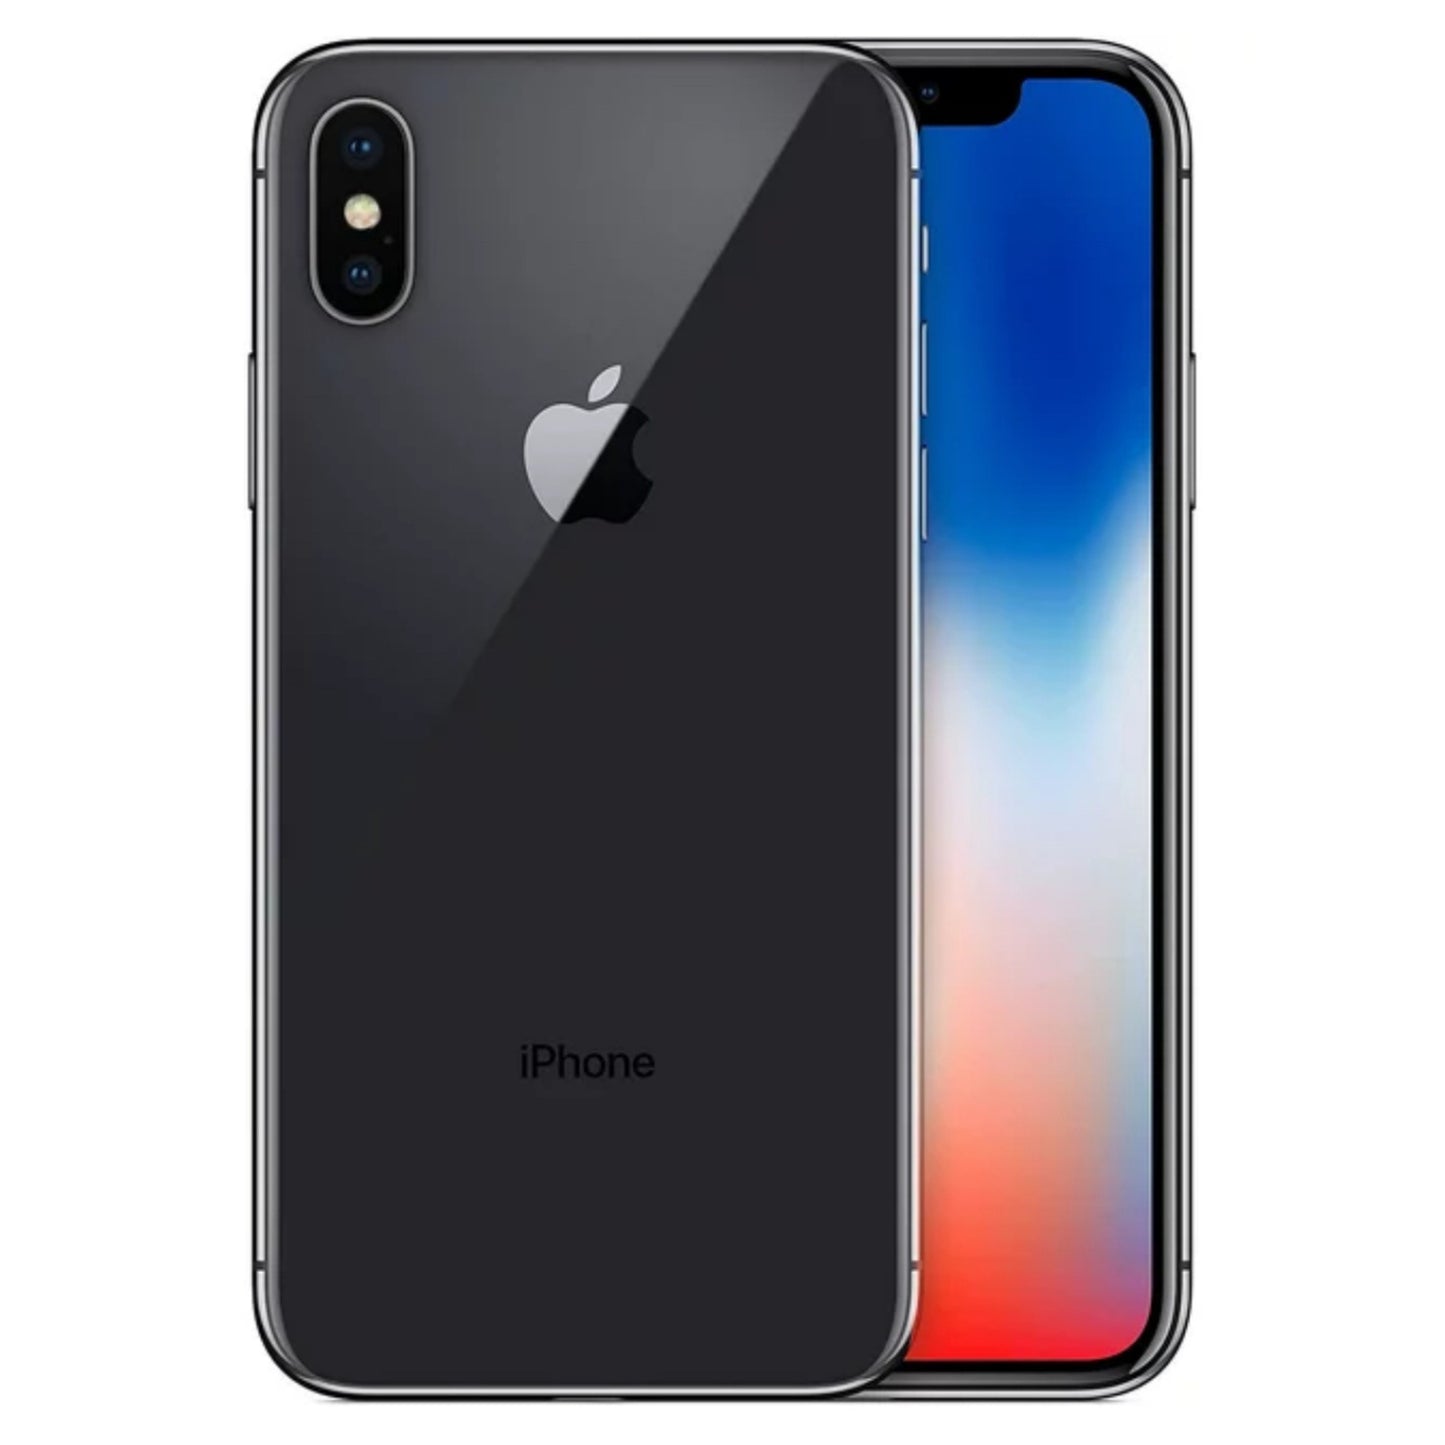 iPhone X Space Gray 256GB (Unlocked) Pre-Owned